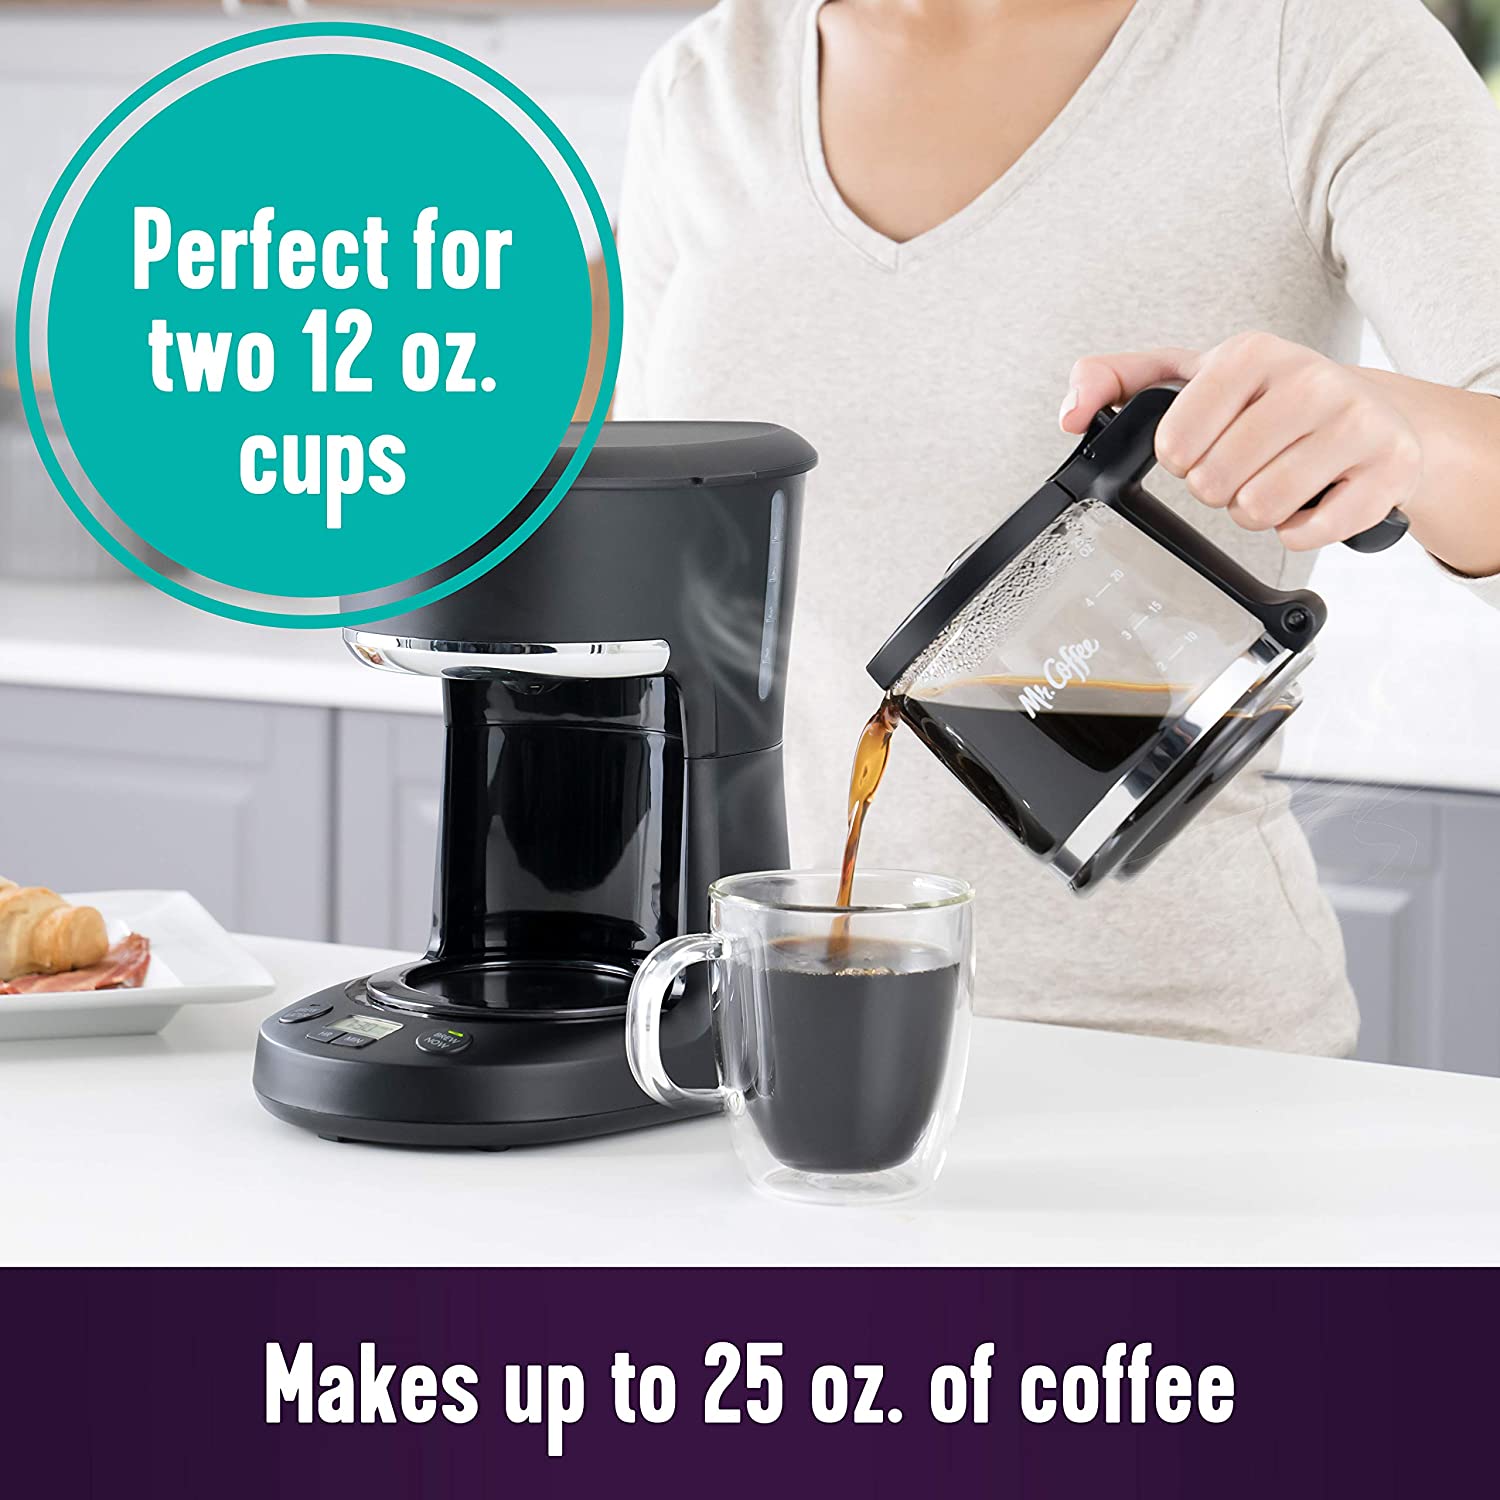 Mr. Coffee 5 Cup Programmable 25 oz. Mini, Brew Now or Later, Coffee Maker, Black - image 3 of 5